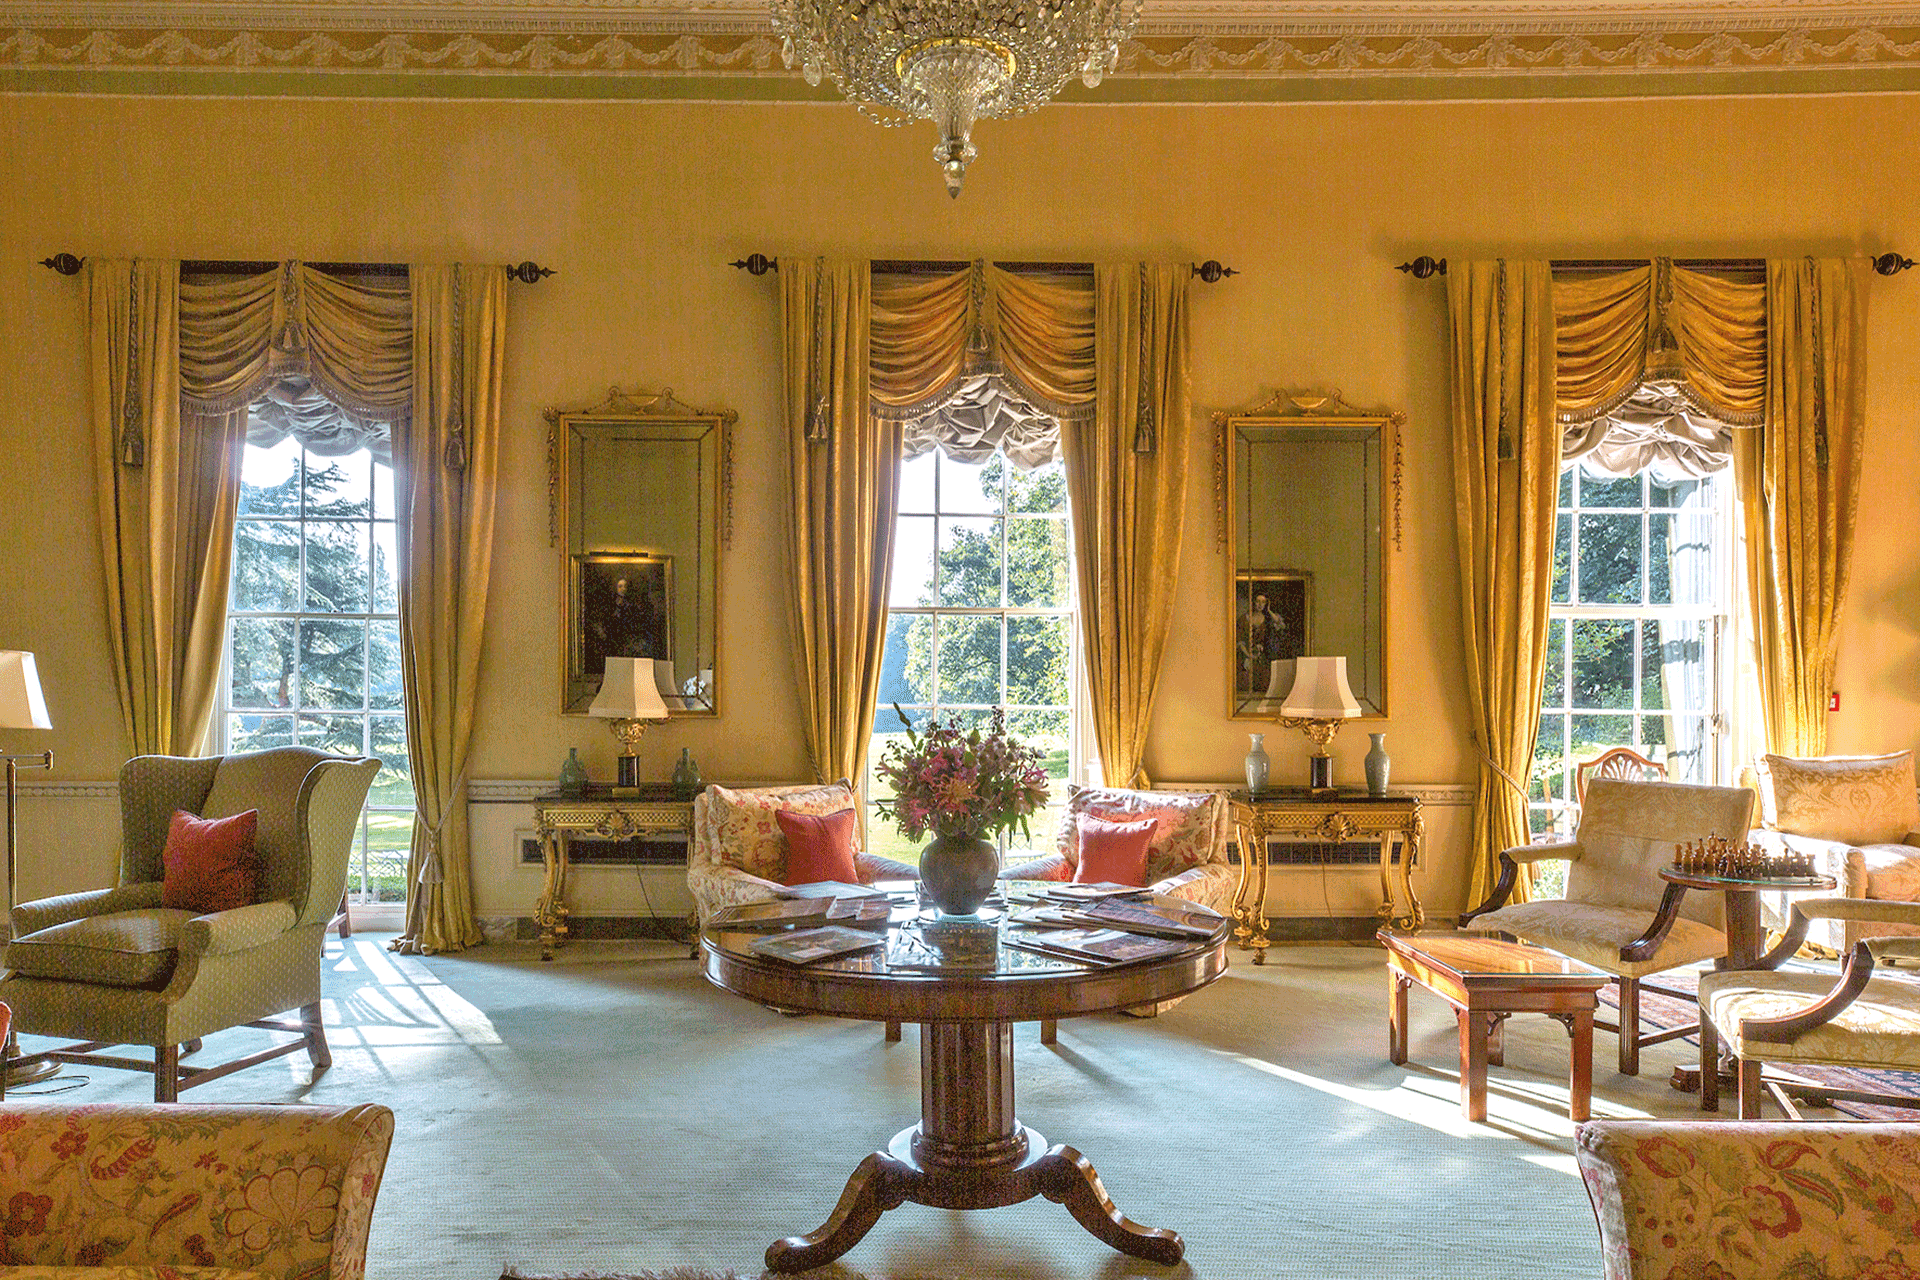 Suite at Middlethorpe Hall.